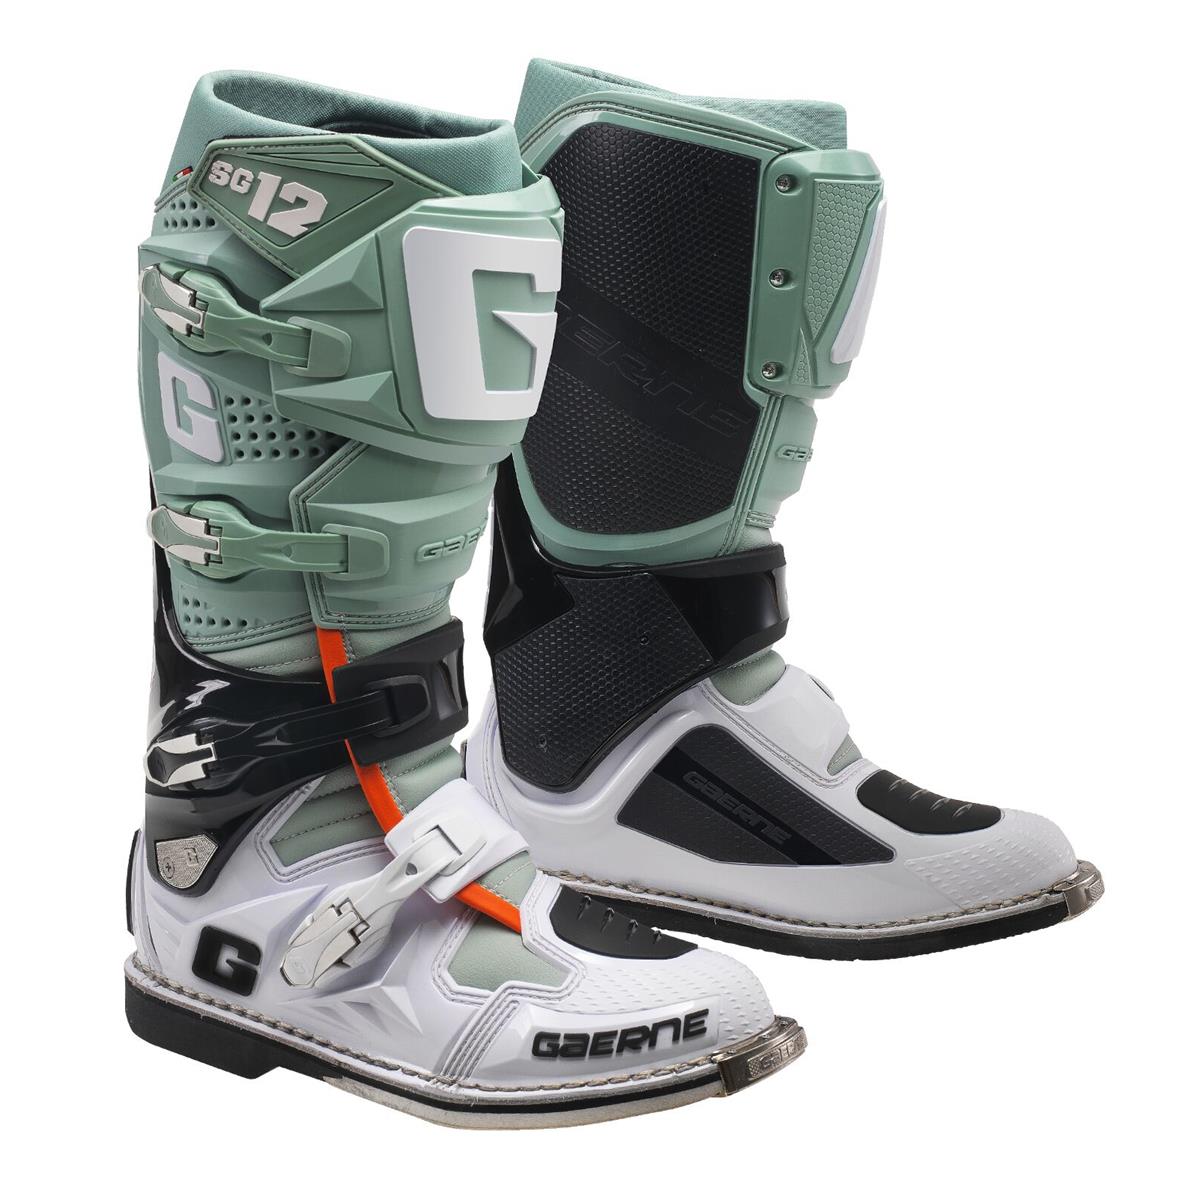 Gaerne Bottes MX SG 12 Paste - Special Edition